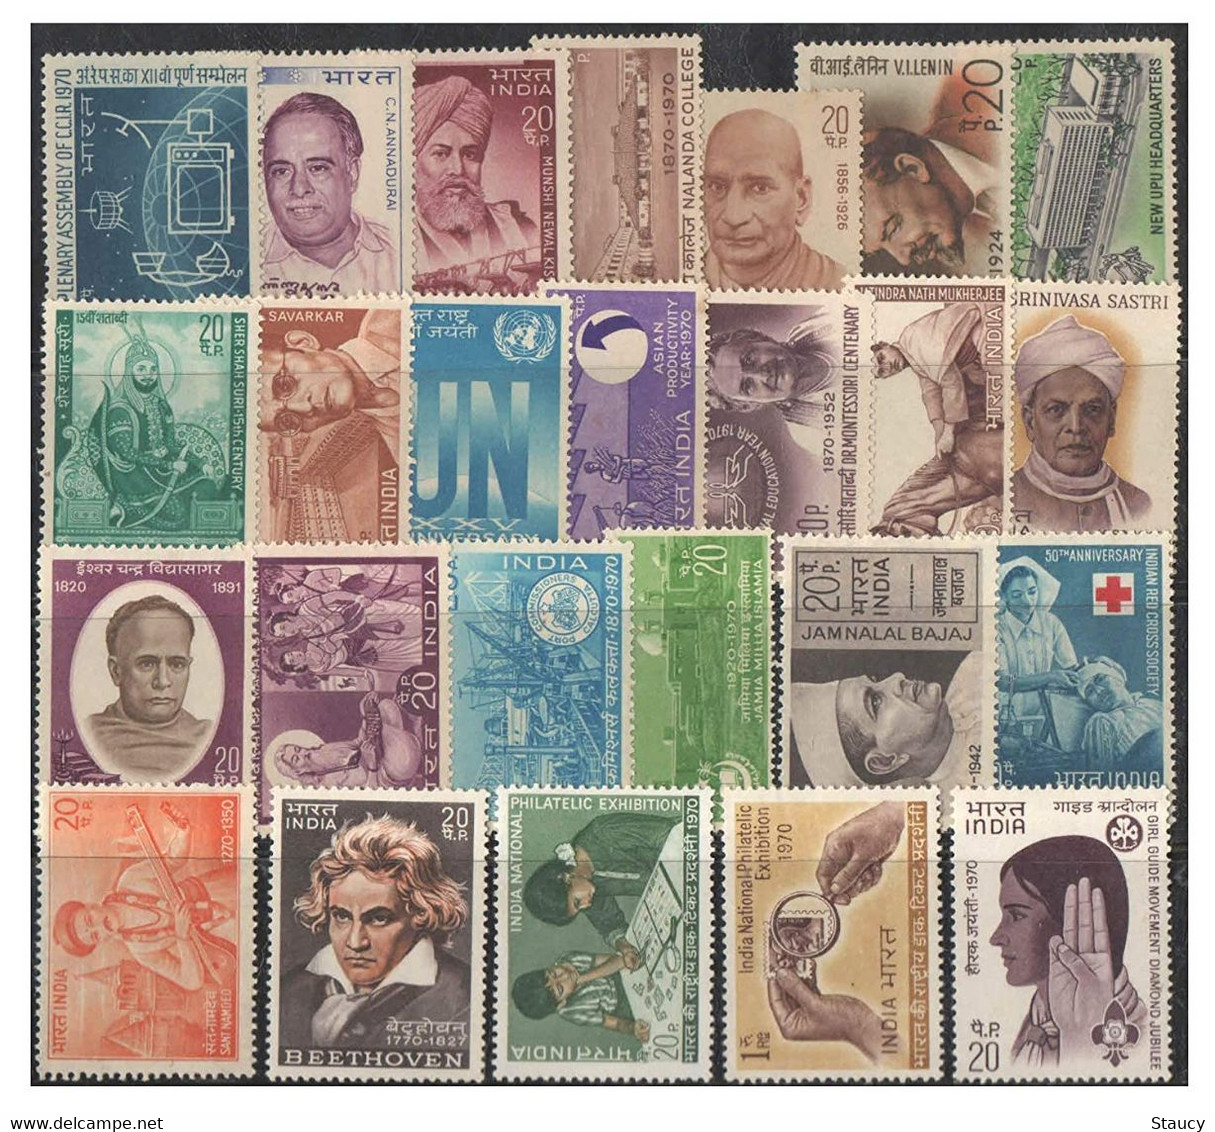 India 1970 Complete Year Pack / Set / Collection Total 25 Stamps (No Missing) MNH As Per Scan - Full Years